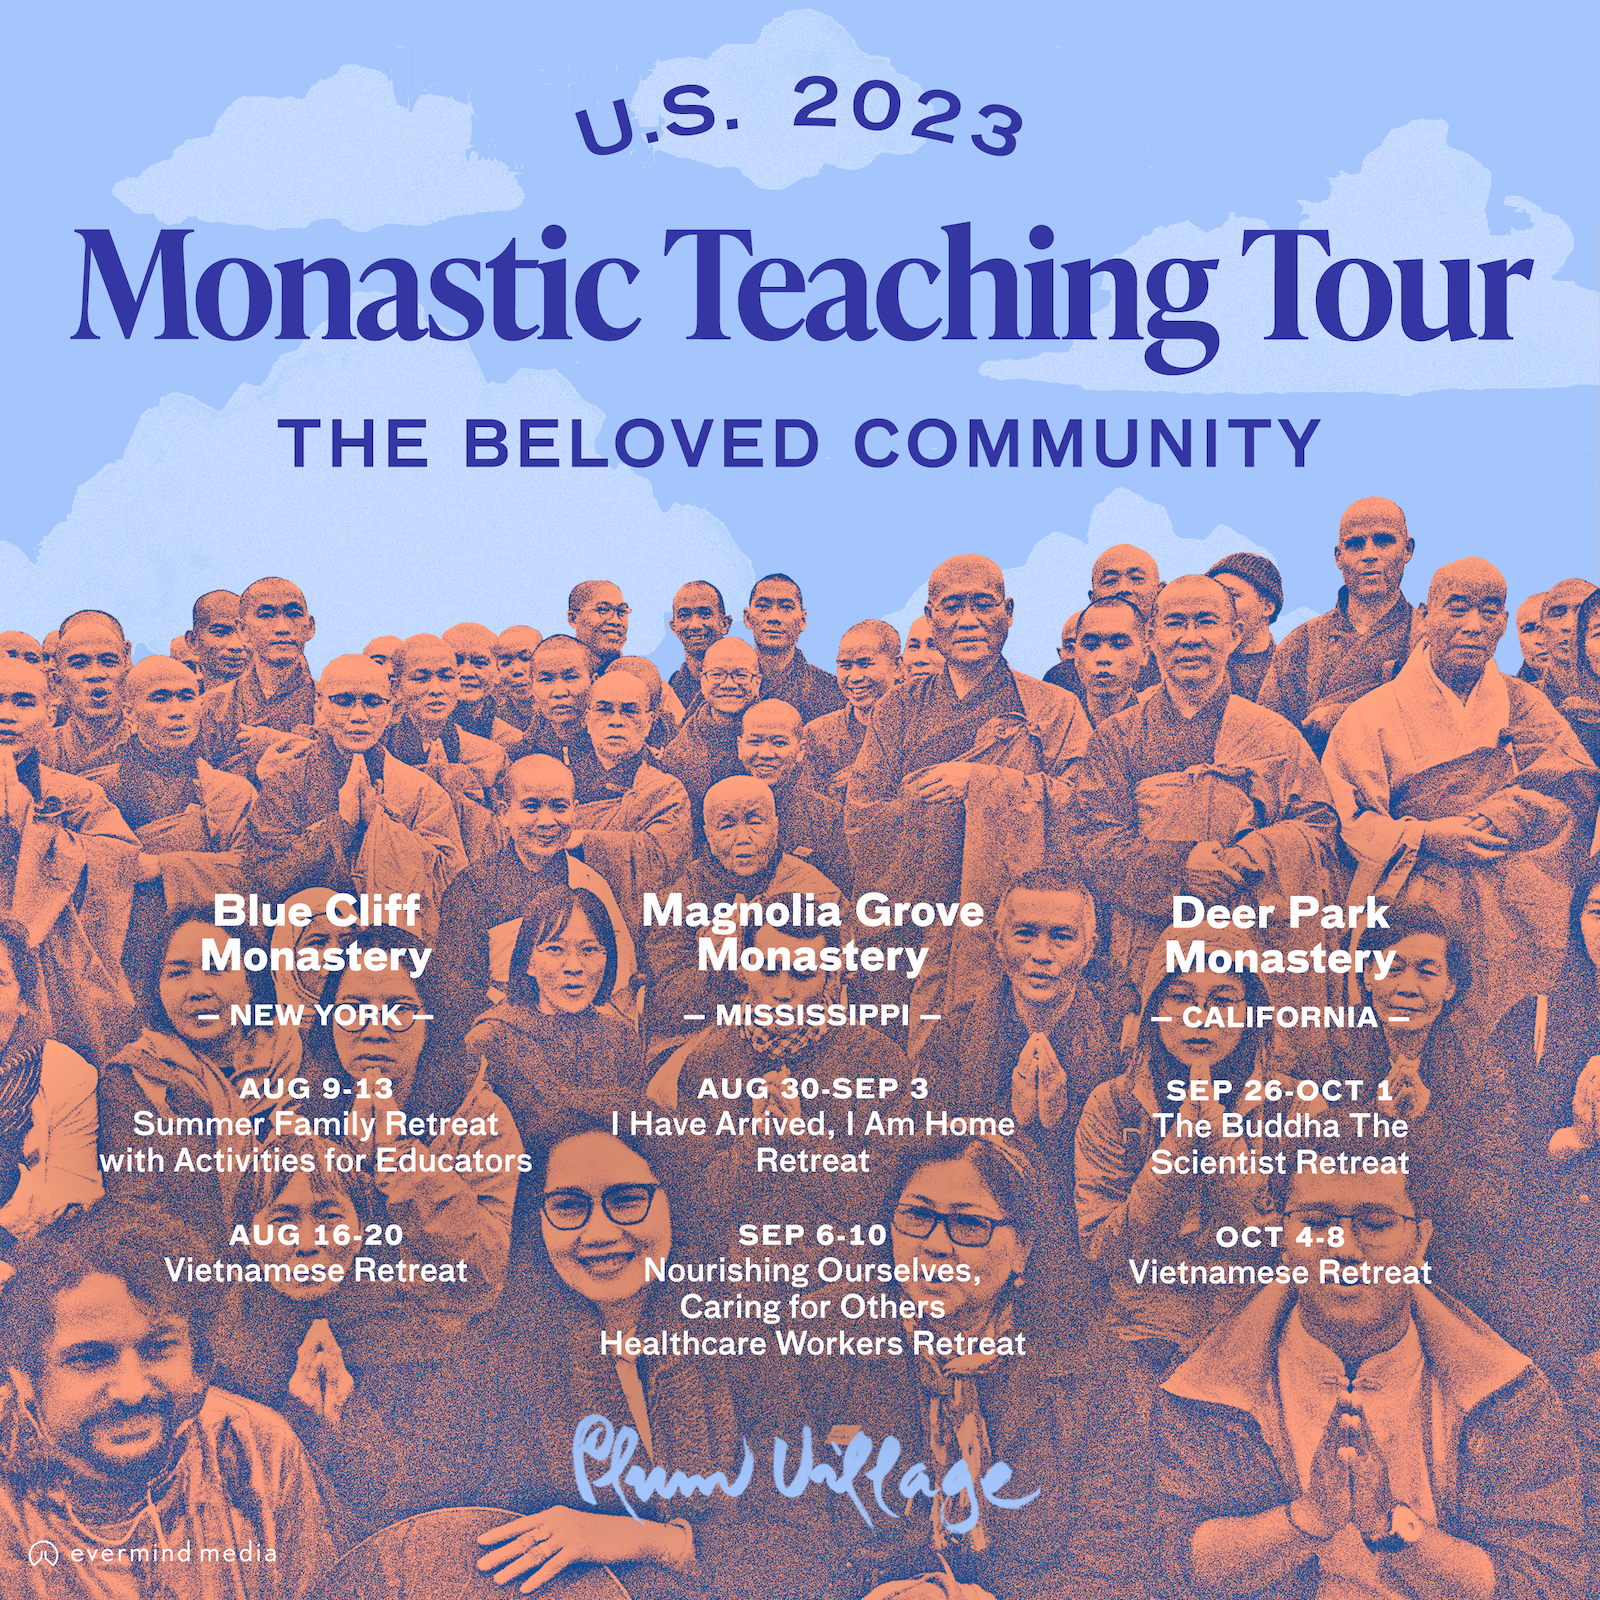 Monastic Teaching Tour: Family Retreat and Educators at Blue Cliff Monastery